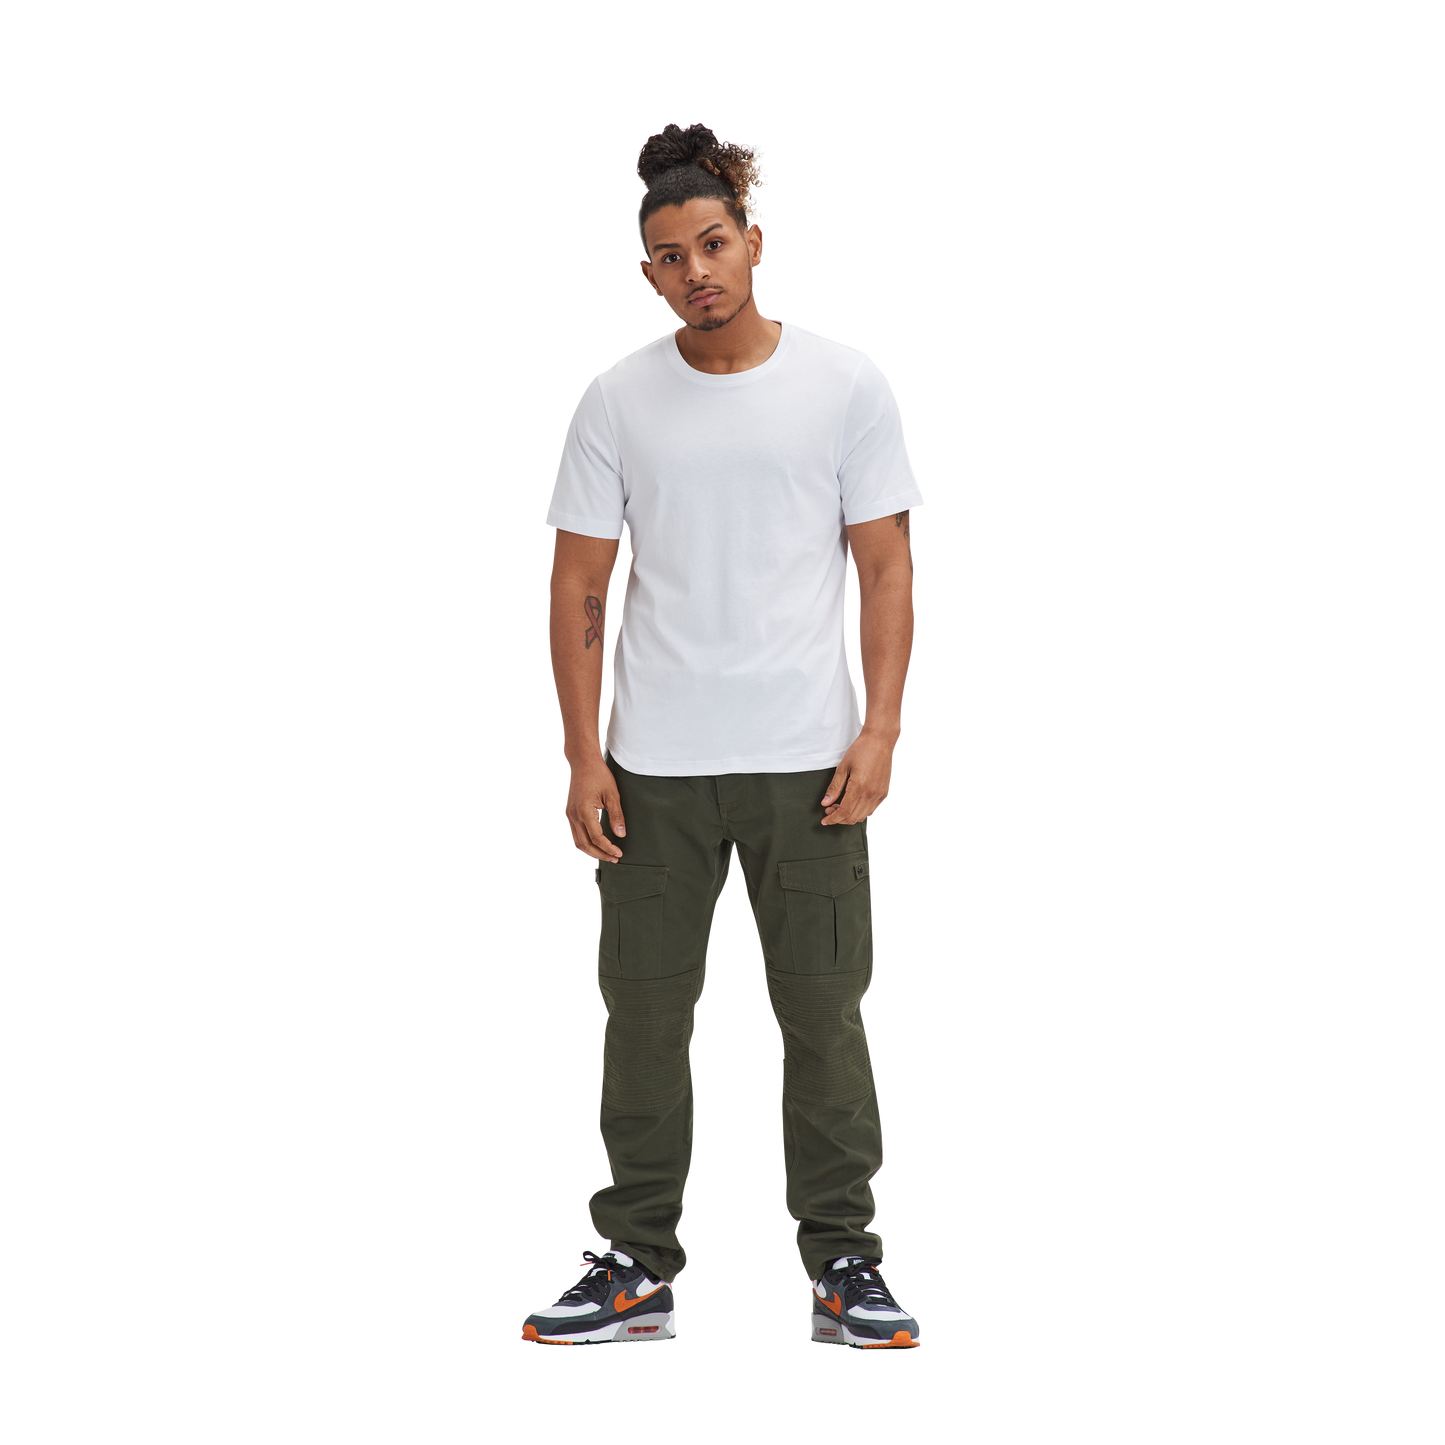 A man wearing a MIA Drop Cut Tee (3) PK White / Sand / Mint by Kulture and green cargo pants.